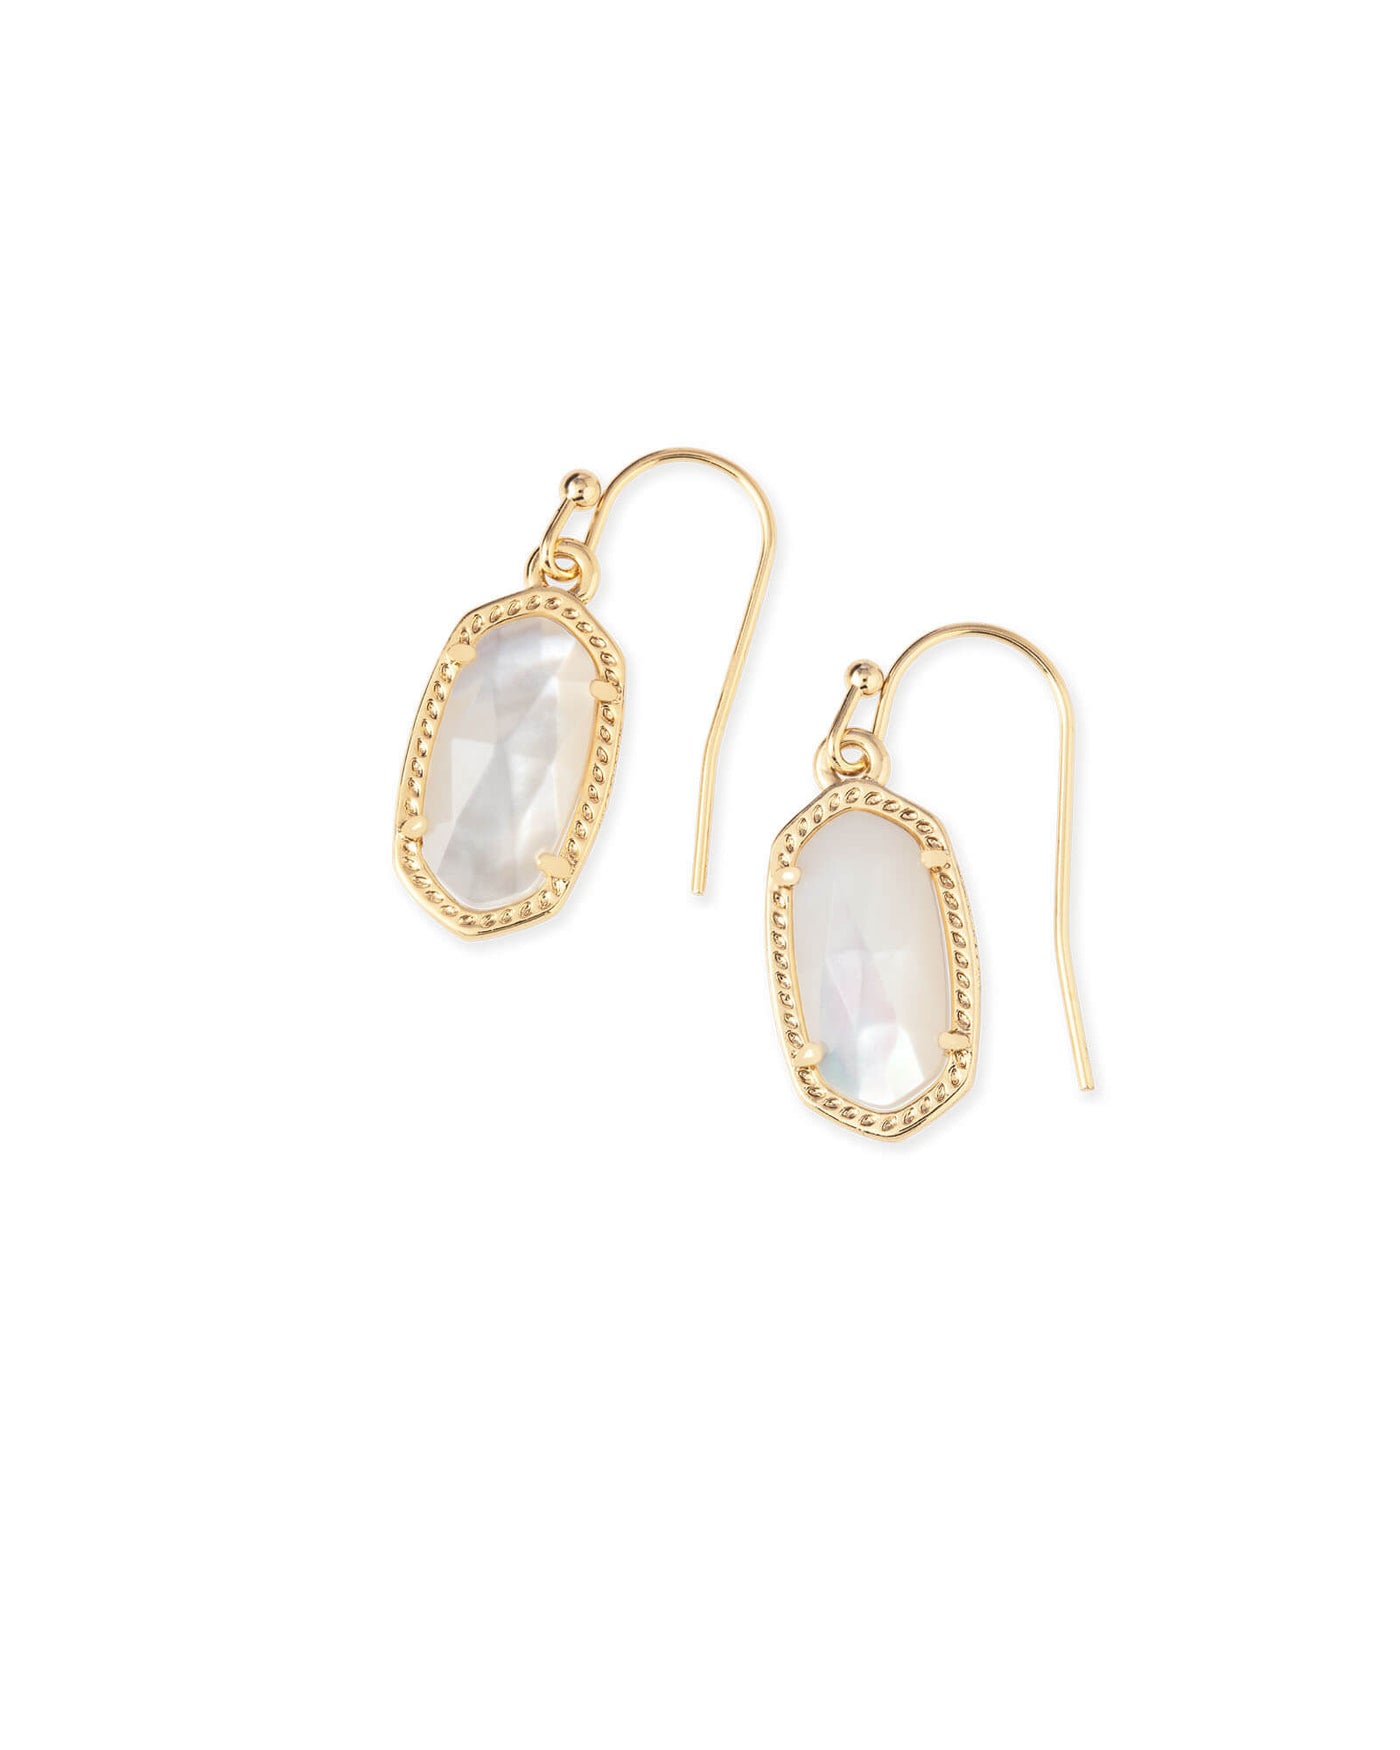 Lee Drop Earrings Gold Ivory Mother of Pearl on white background, front view.